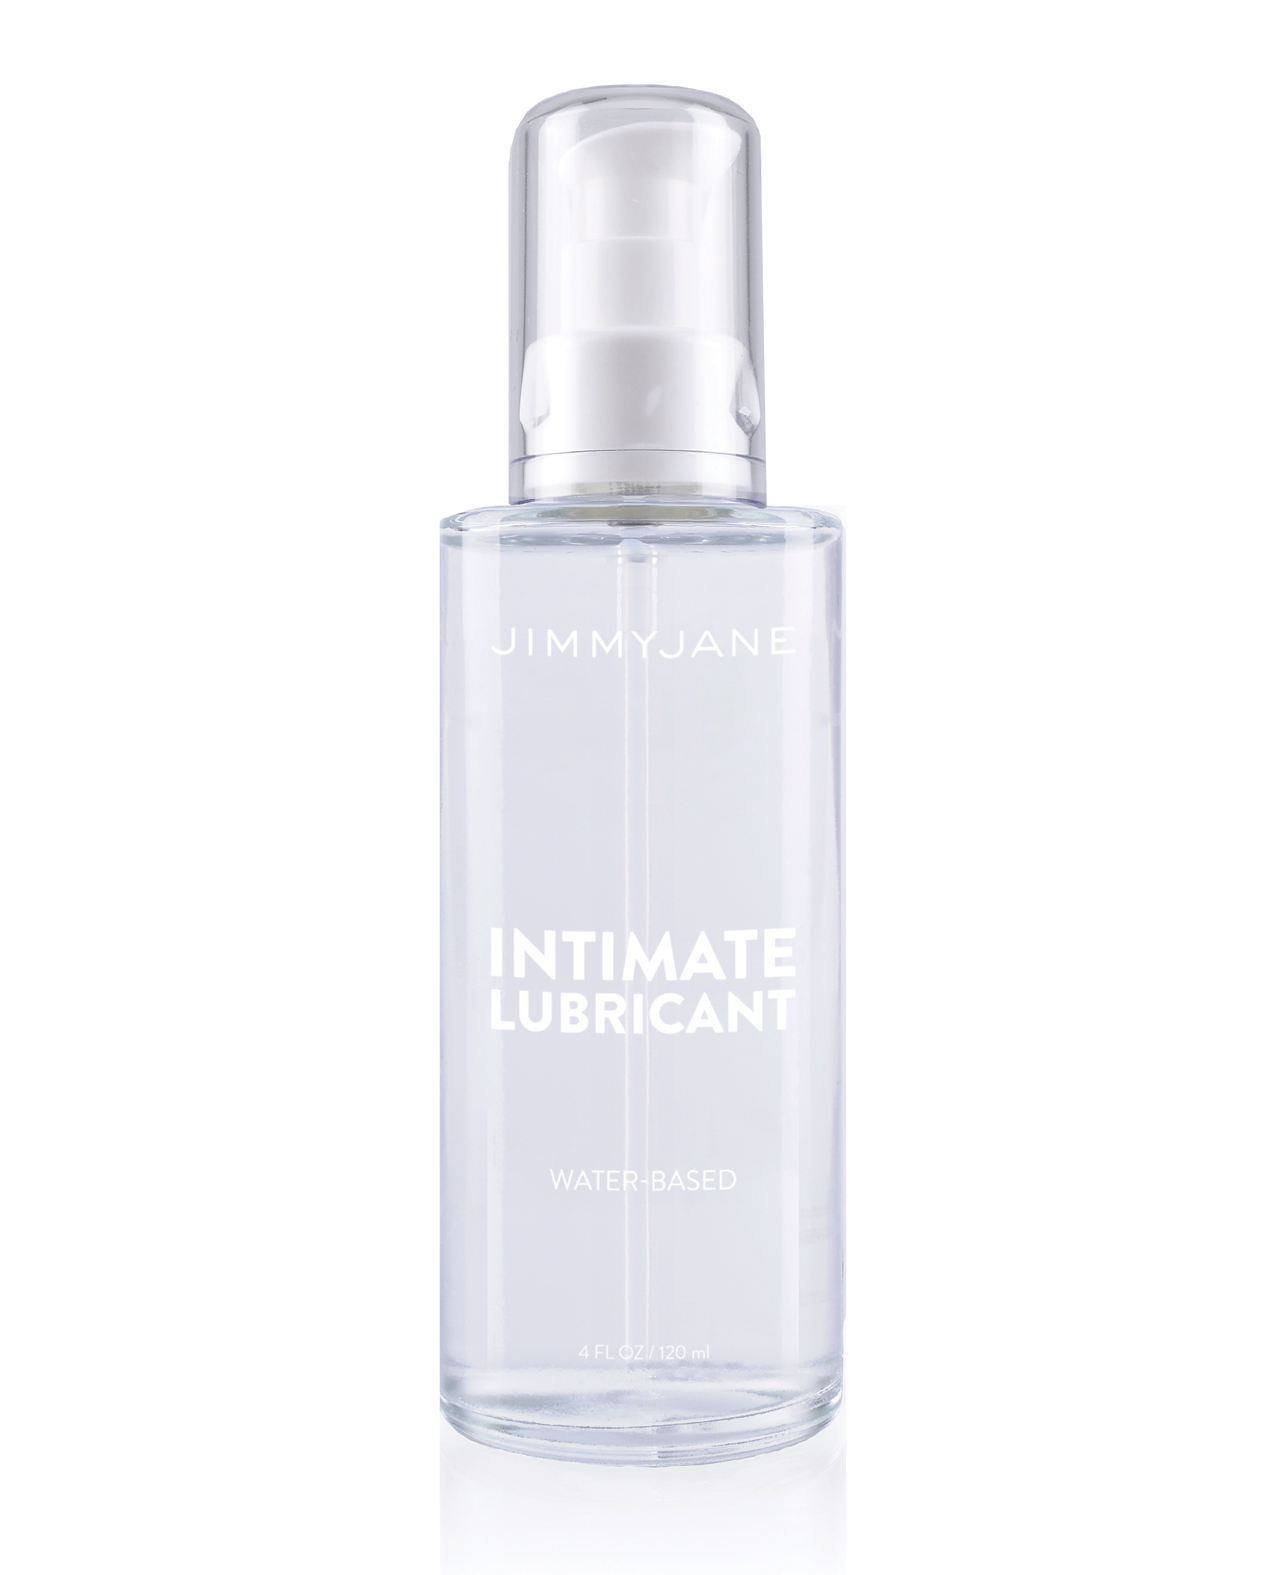 JimmyJane water based Intimate Lubricant 4 oz in a clear bottle